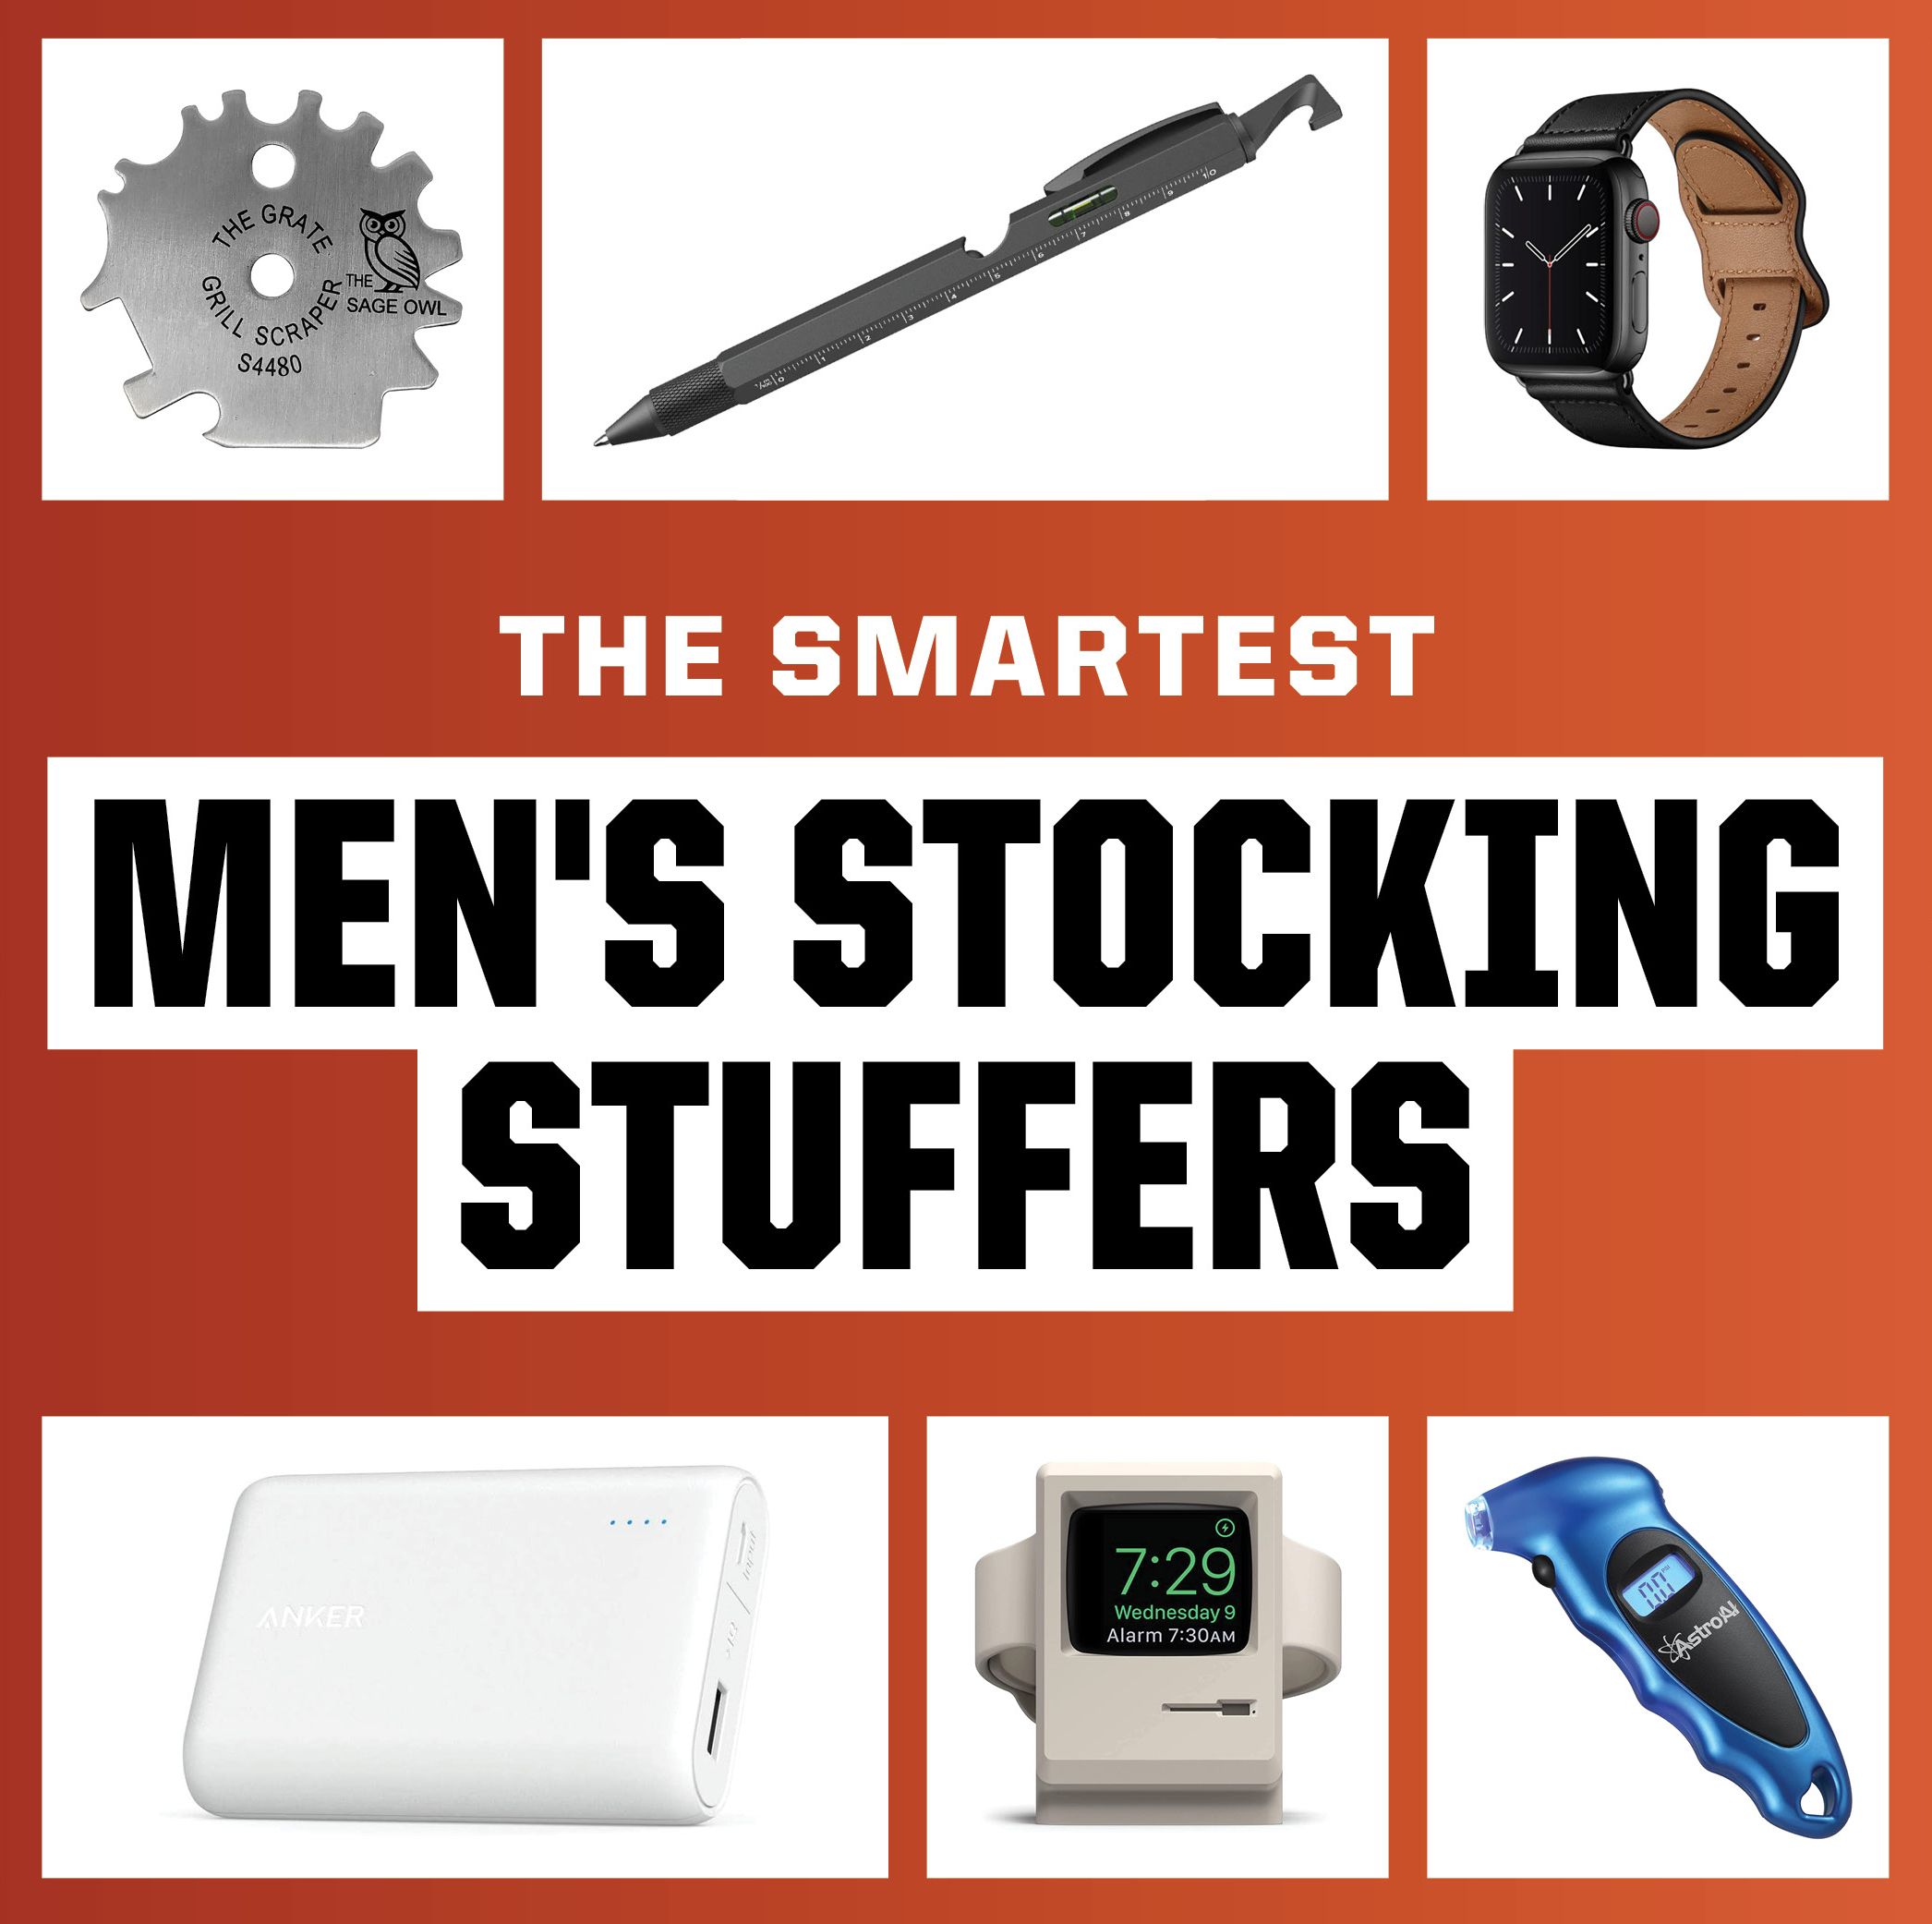 These Smart Stocking Stuffers for Men Are All Under $25